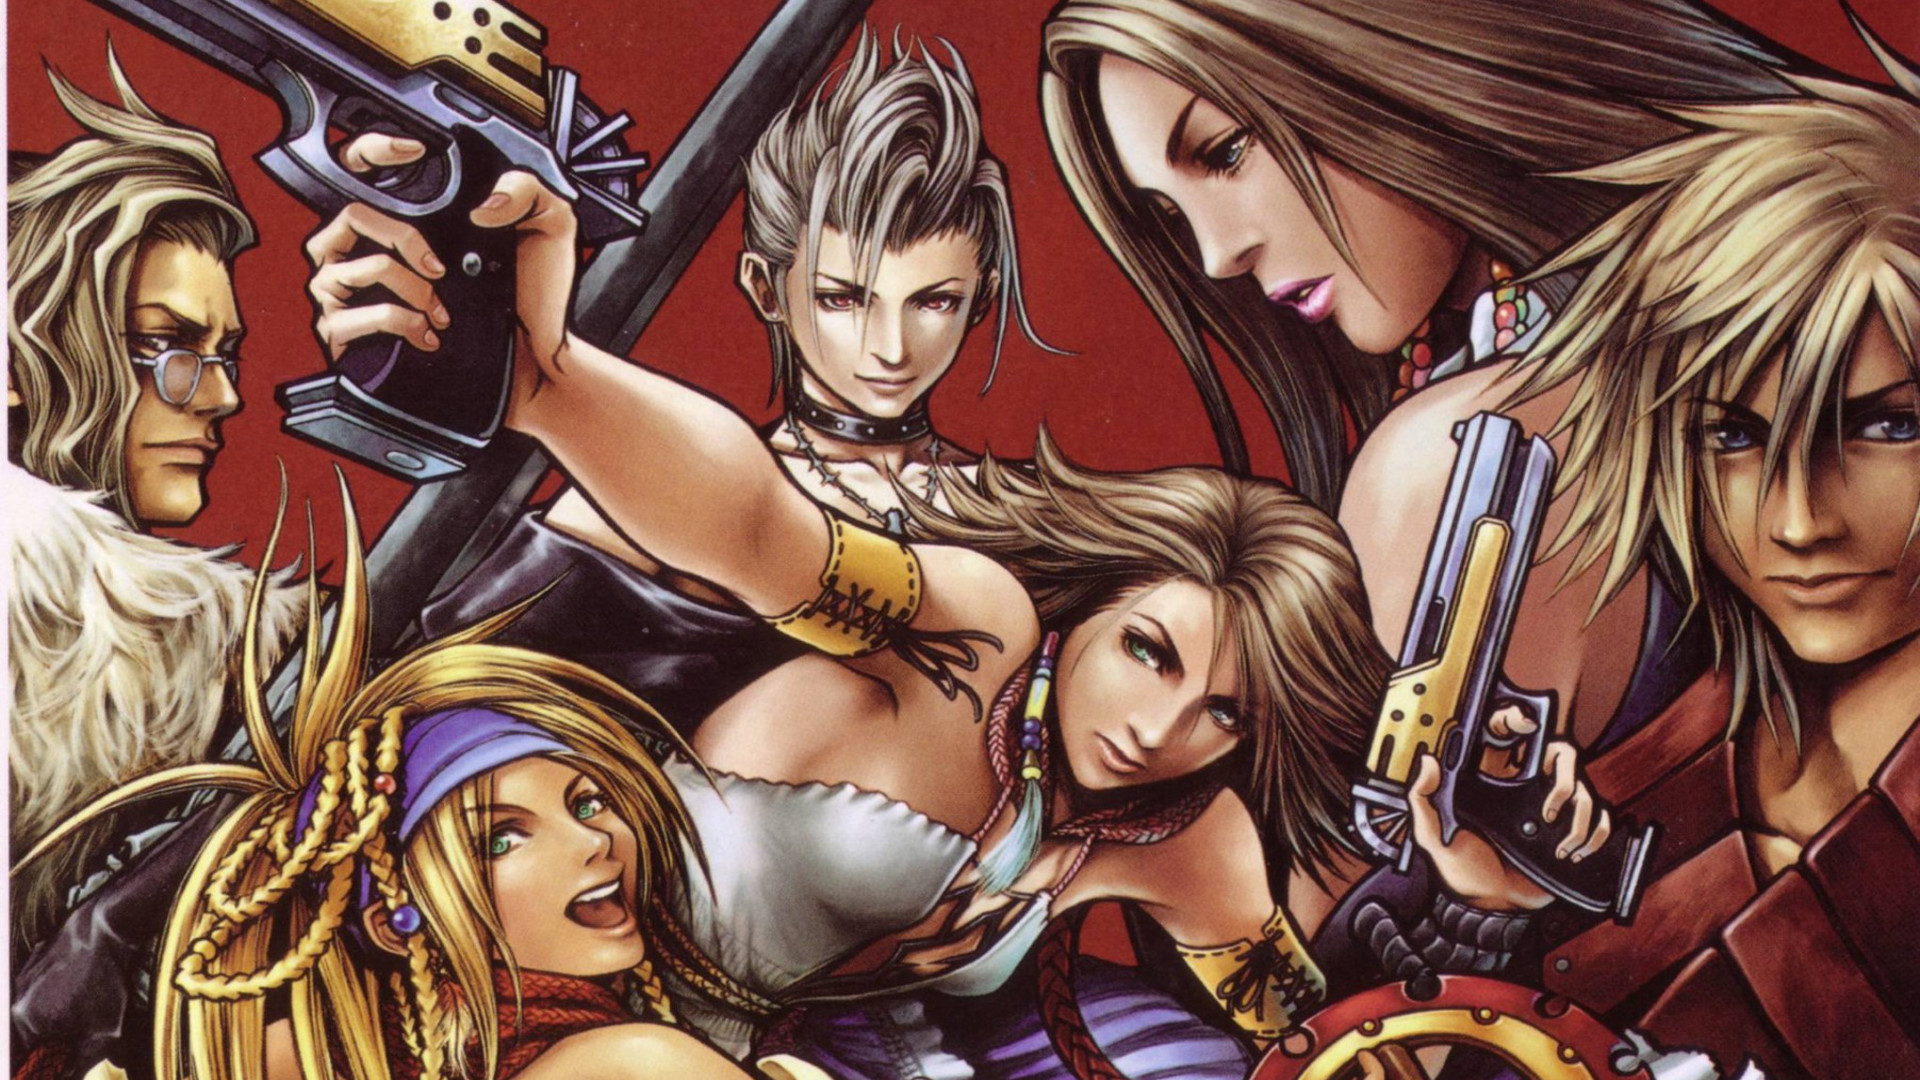 download final fantasy x & x 2 for free